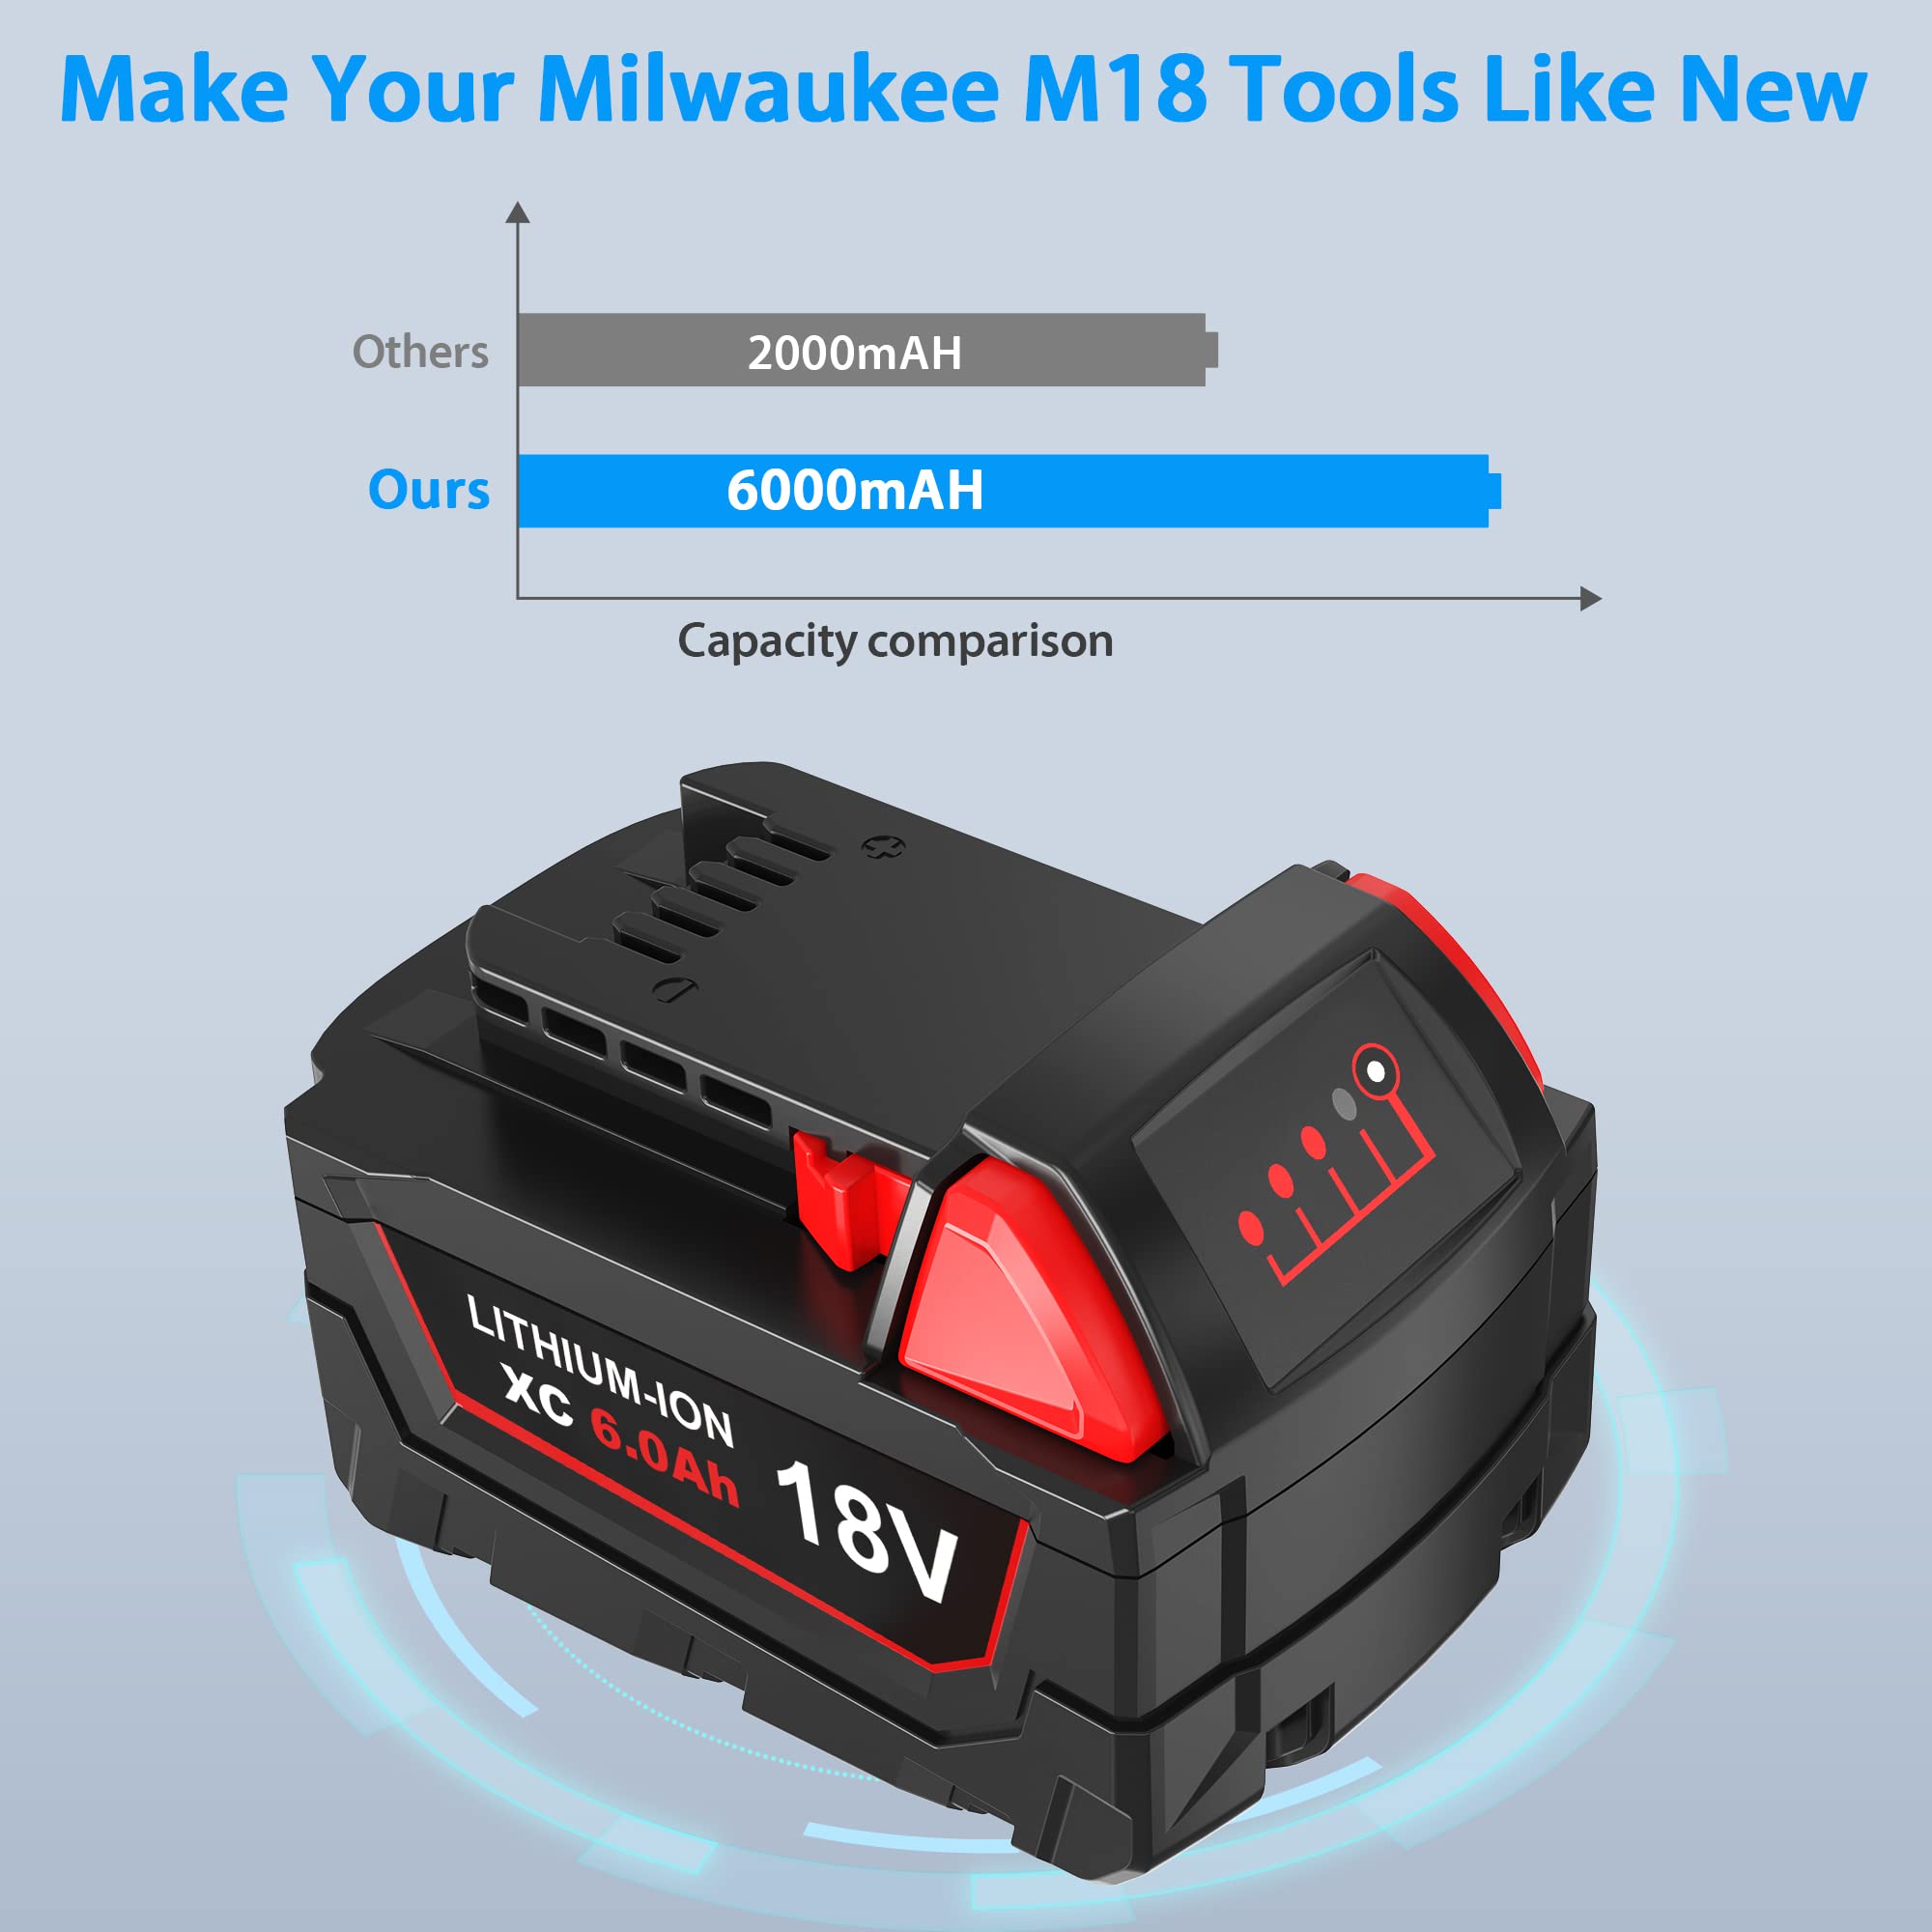 New Replacement Milwaukee M18 Battery Pack High Output 6.0Ah 18V for Milwaukee M18 Batteries Lithium 48-11-1862 48-11-1852 48-11-1850 48-11-1840 48-11-1822 48-11-1828 48-11-1815 Battery Pack (2-Pack)